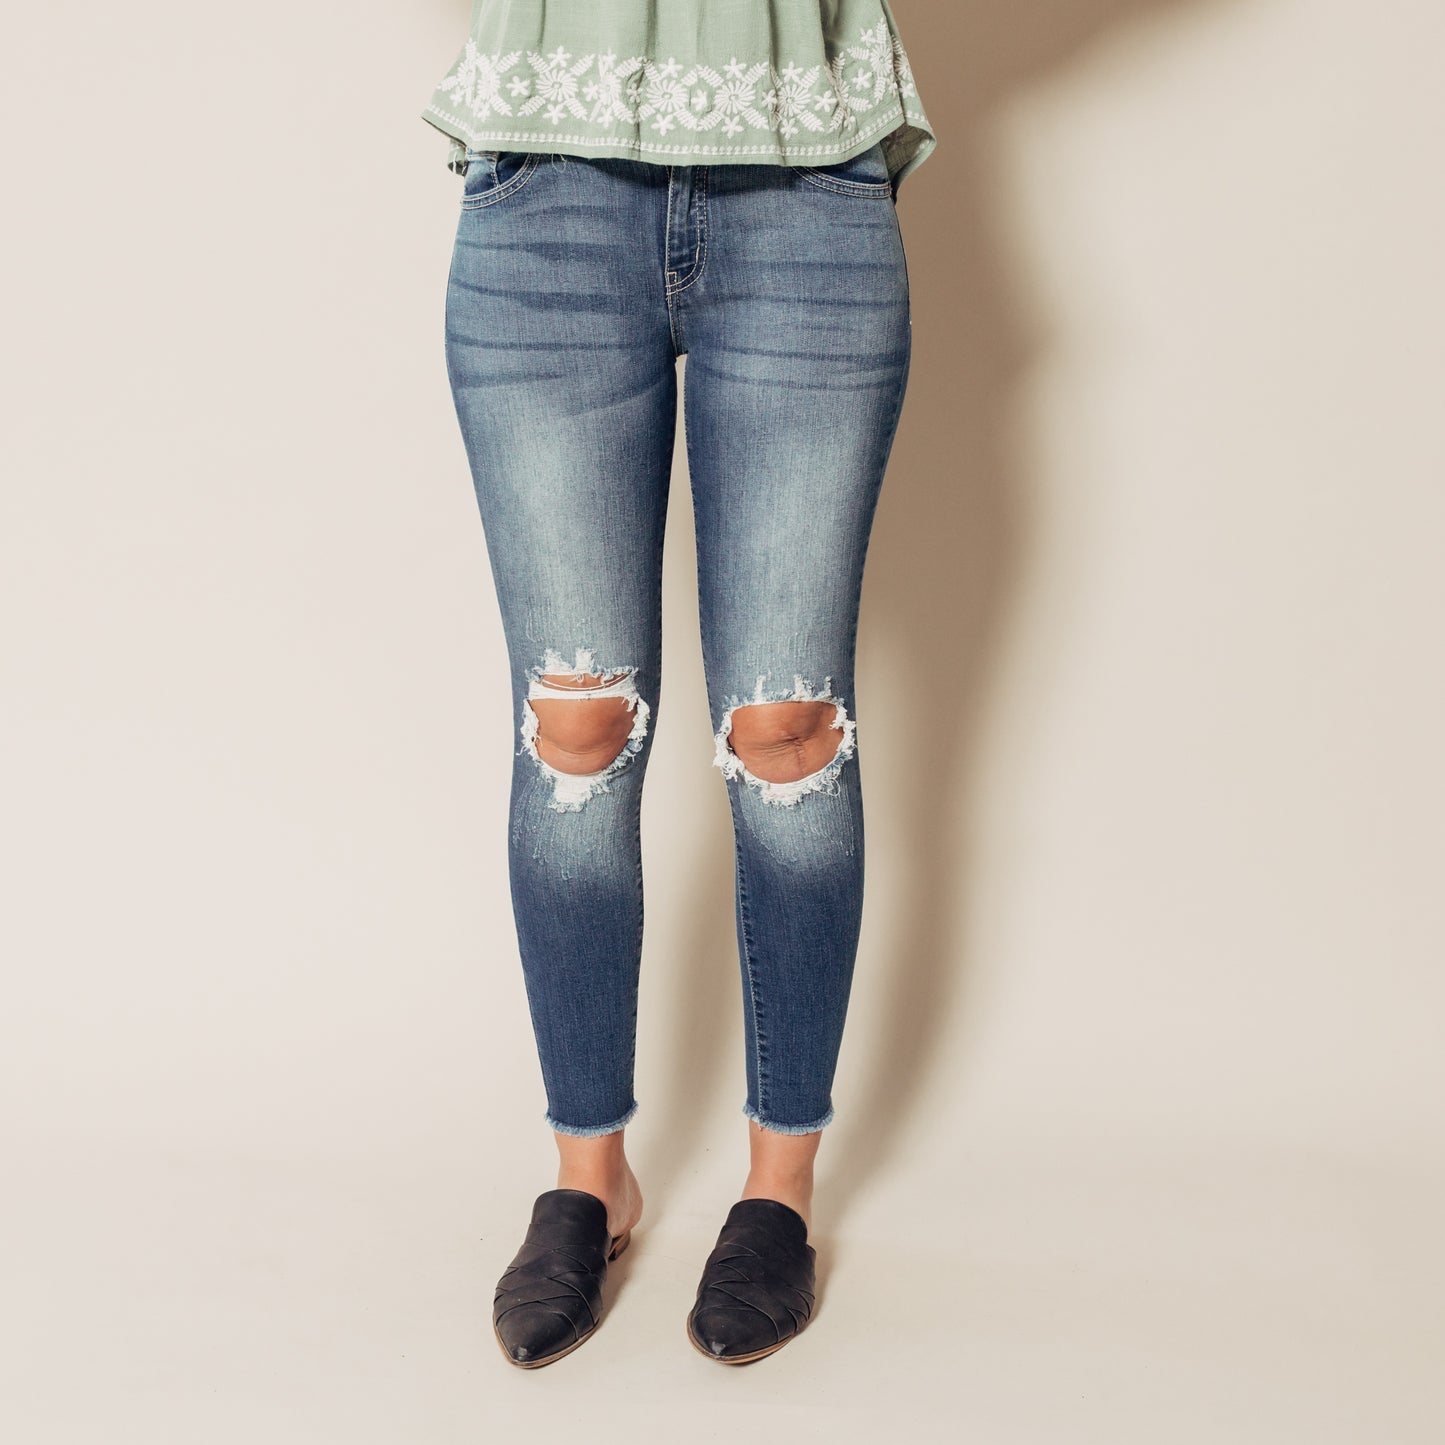 Holey Jeans – Alice Loves Clothes